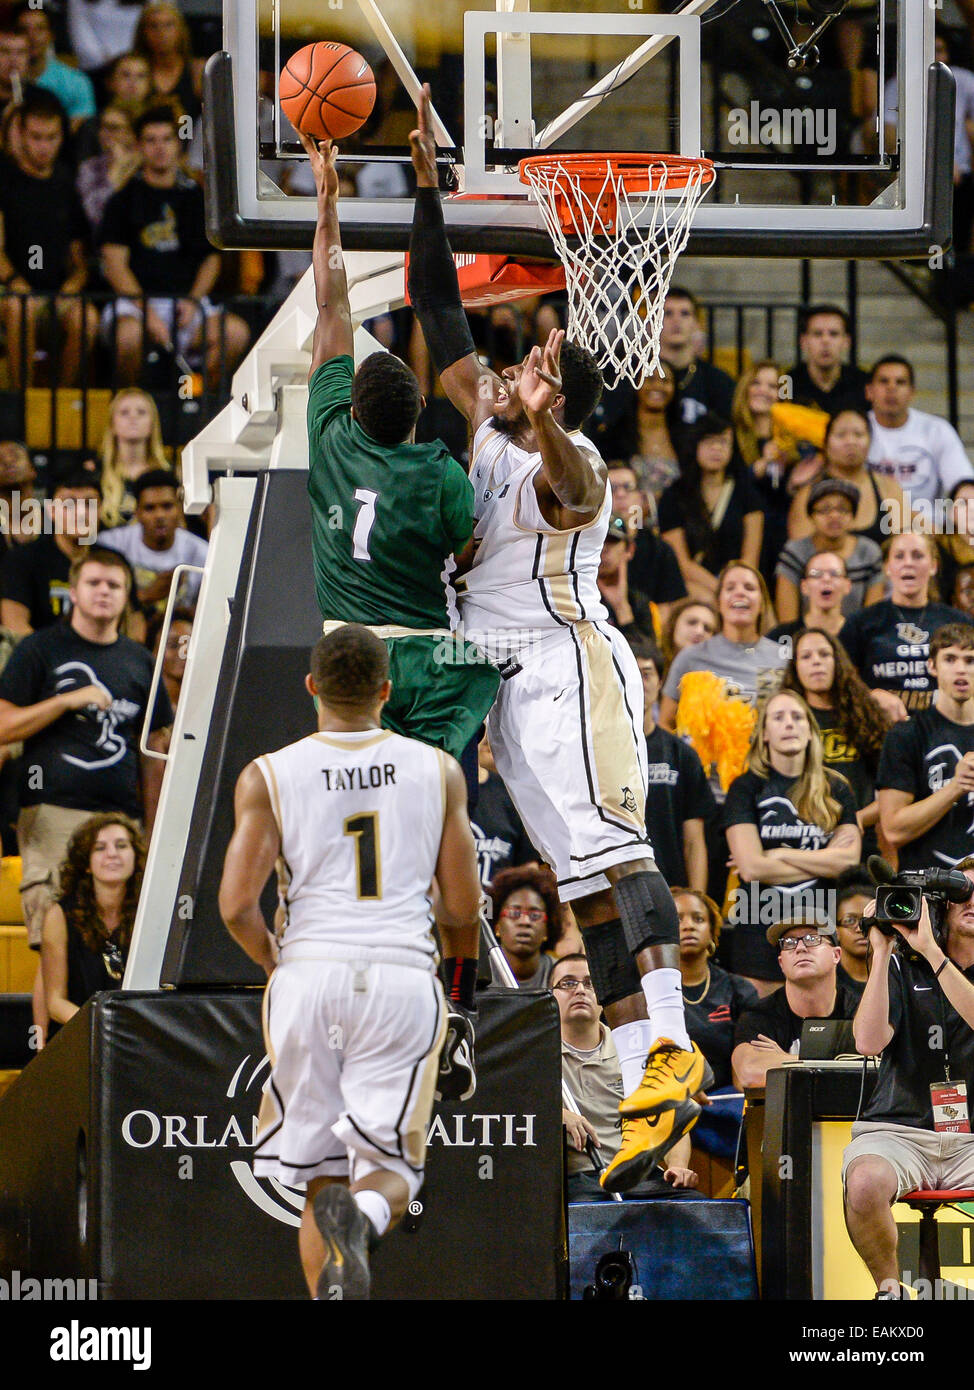 November 16, 2014 - Orlando, FL, U.S: UCF Knights forward Staphon Blair (52) blocks the ball on a layup attempt by Stetson Hatters guard Divine Myles (1) during 2nd half mens NCAA basketball game action between the Stetson Hatters and the UCF Knights. UCF defeated Stetson 64-55 at CFE Arena in Orlando, Fl. Stock Photo